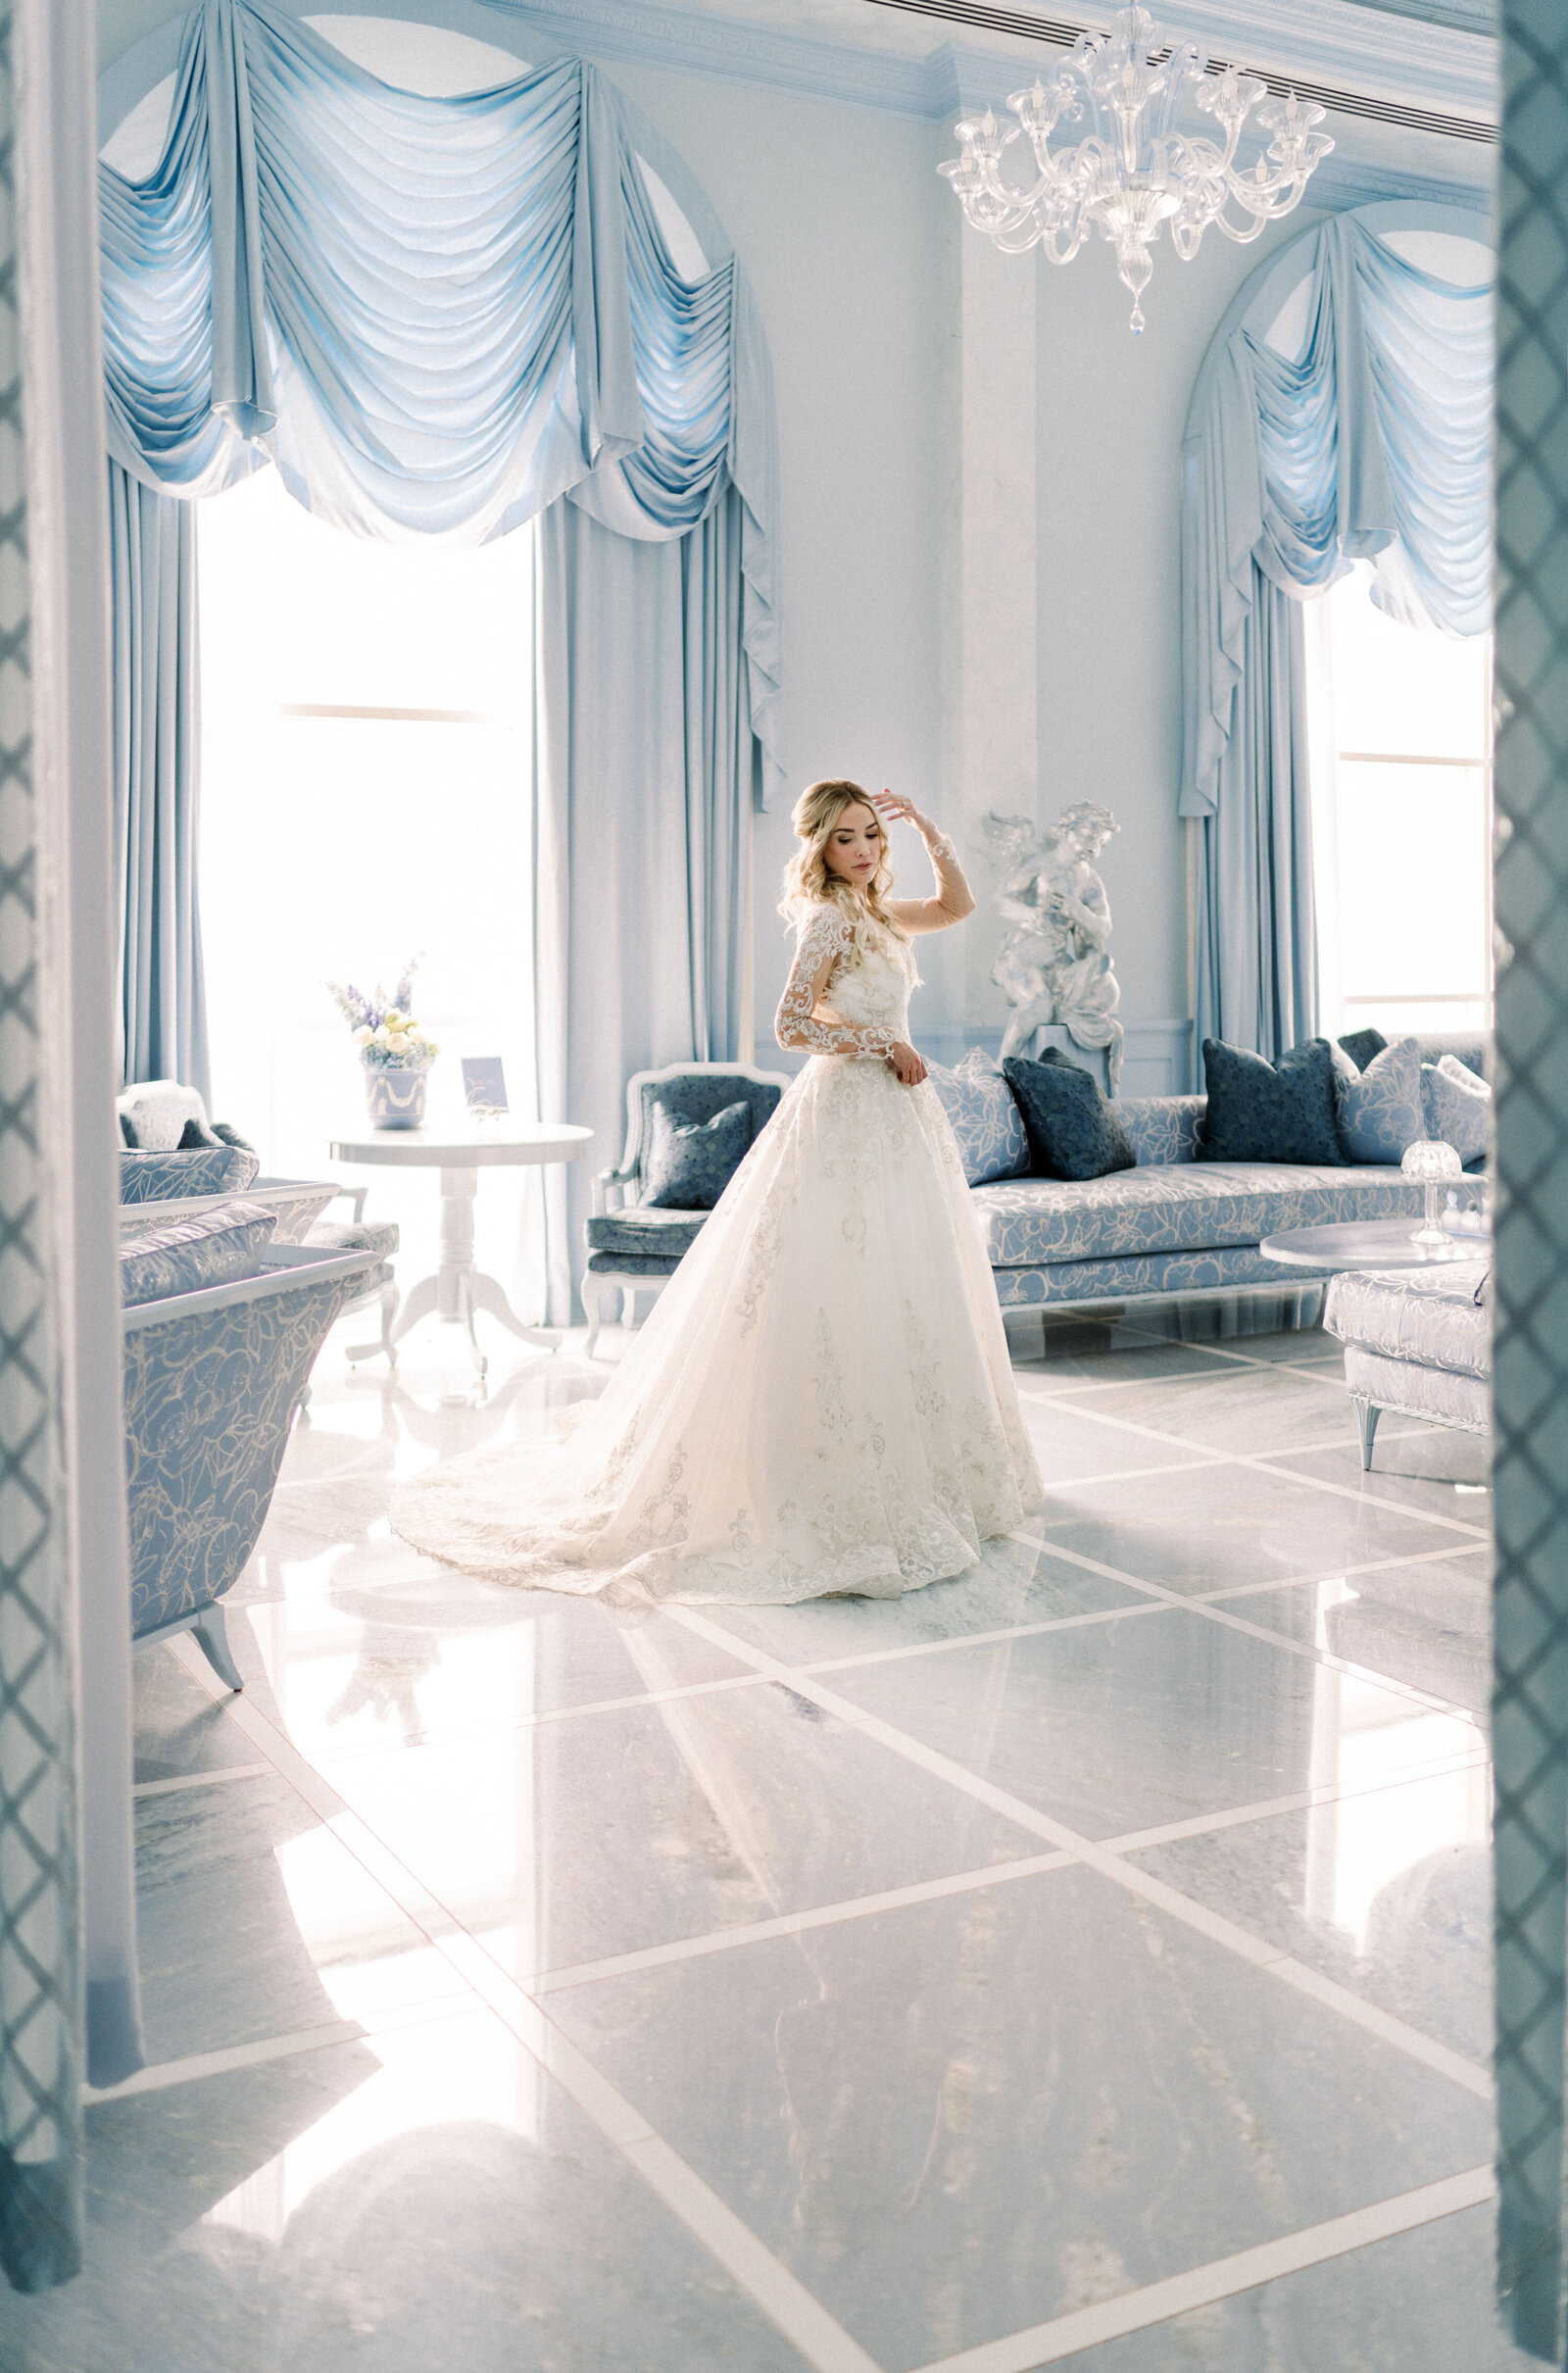 Nemacolin-Luxury-Wedding-Planner-French-Blue-Palette-Novalee-Events-Co-Romantic-Wedding-Gown-Blue-Room